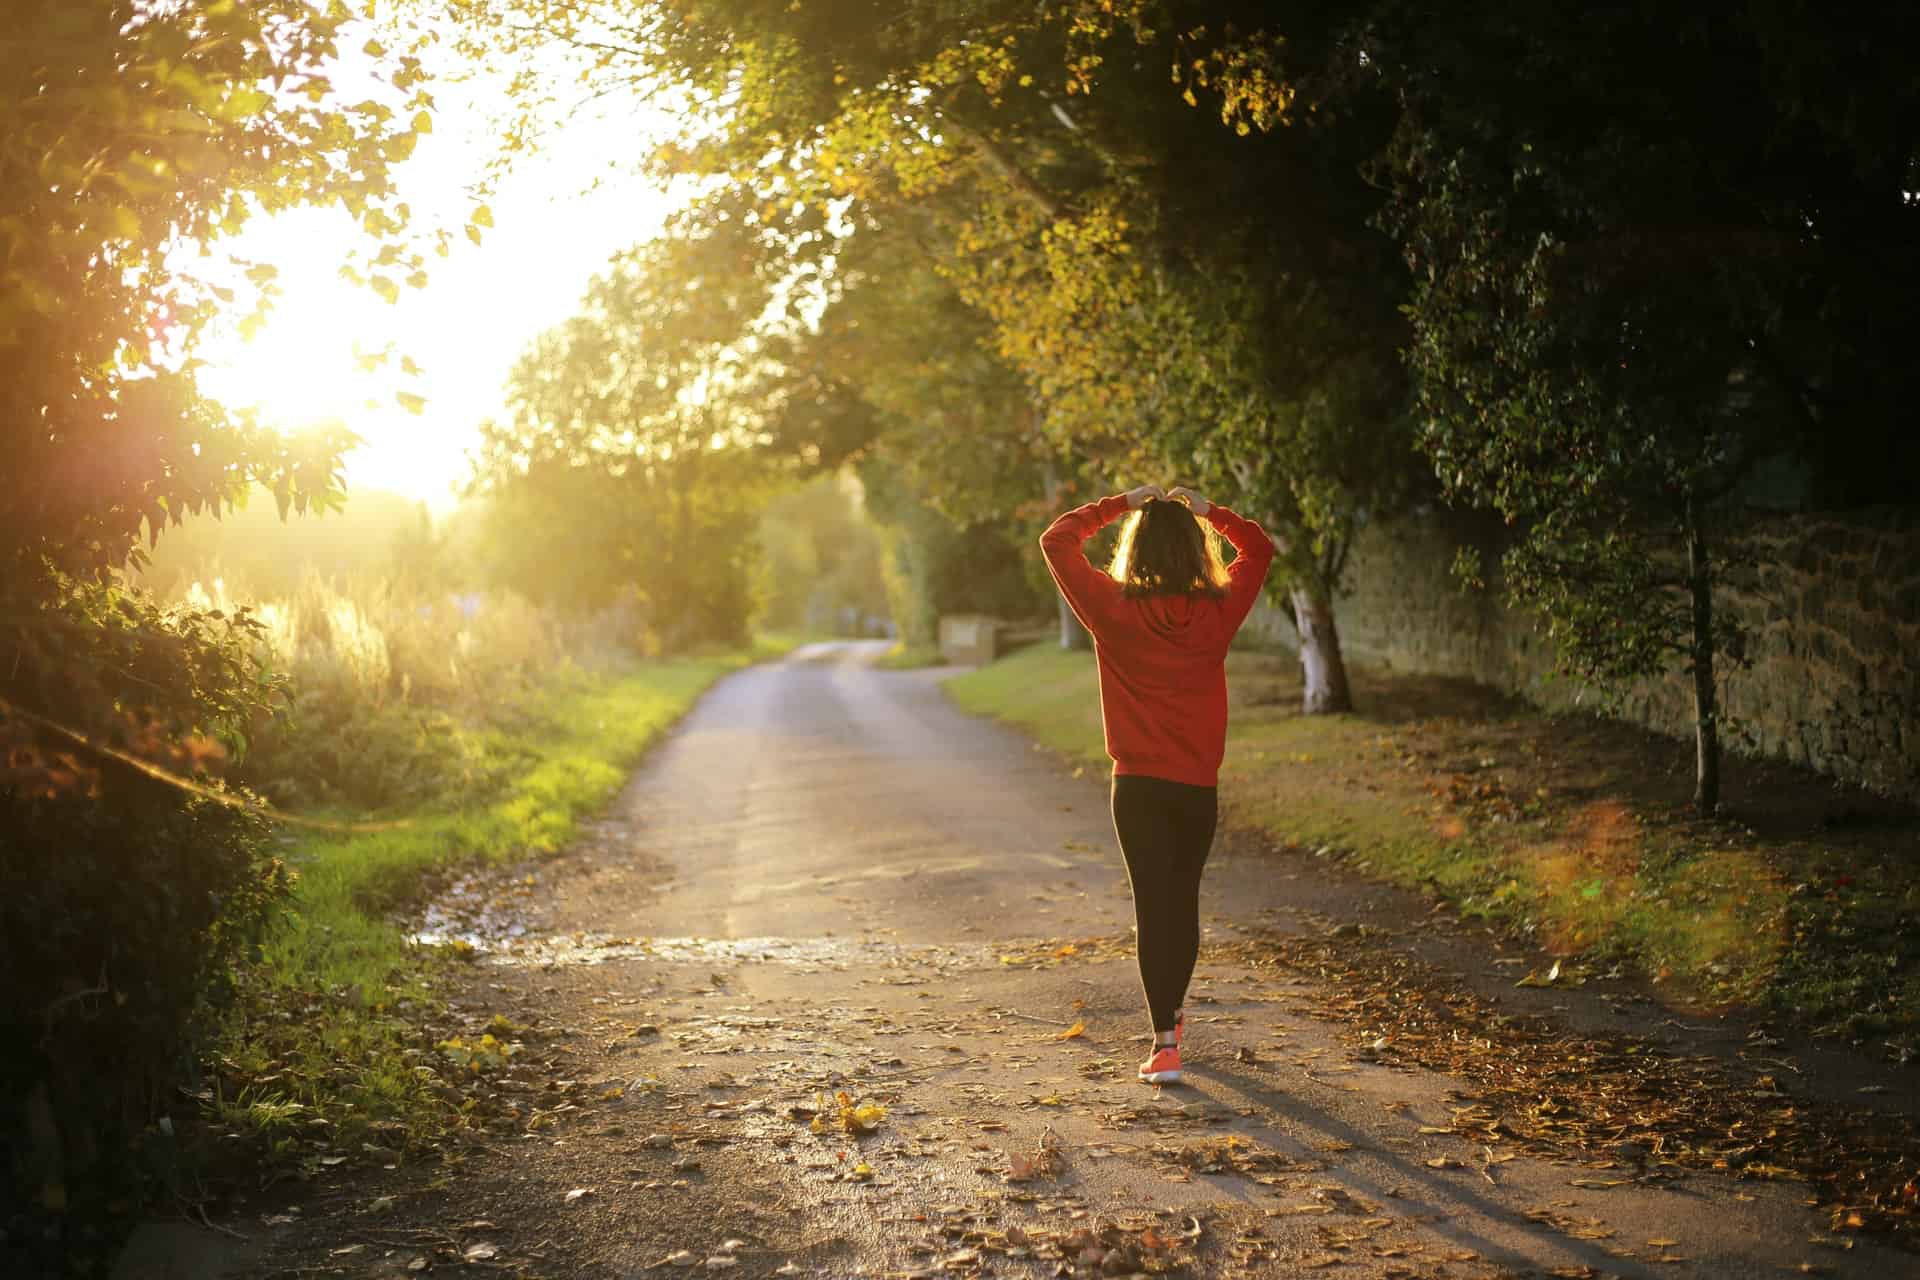 The Close Connection Between Exercise and Mental Health